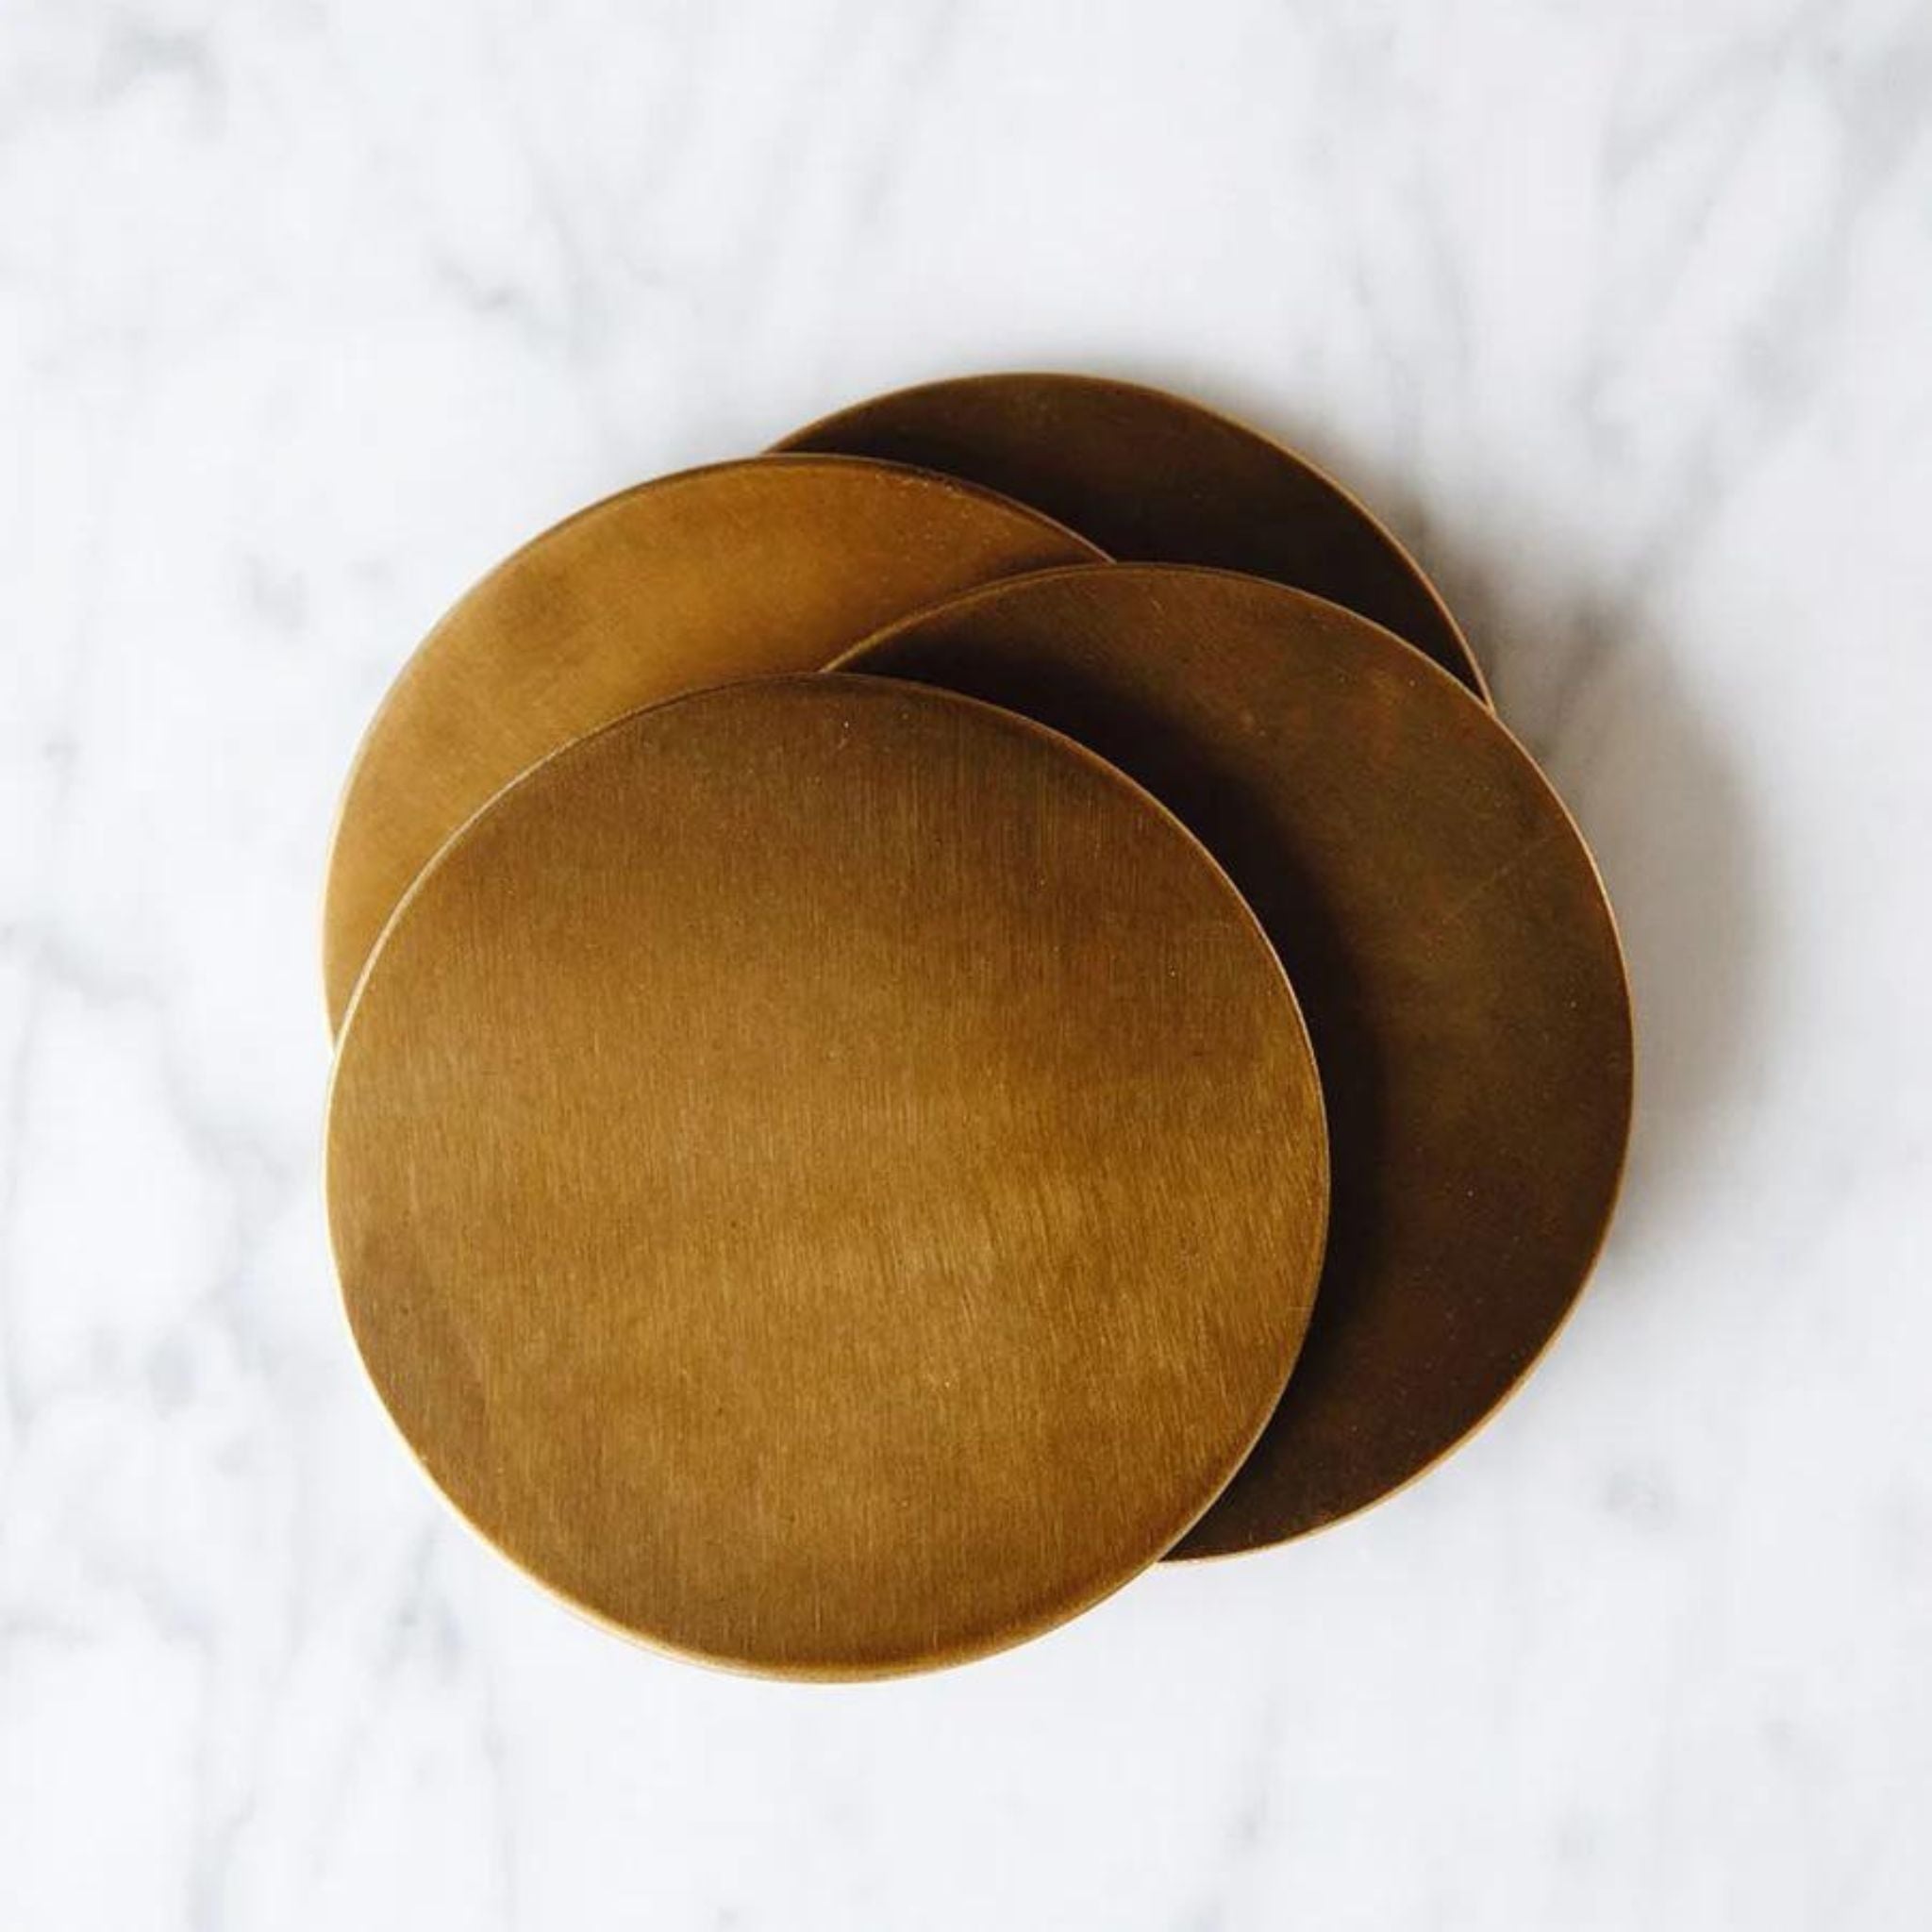 Simply Elevated - These coasters are fashioned using pure metals and alloys that will oxidize over time. They are sold in sets of four, and the graphically patinated disks will age gracefully as their lacquer fades to reveal the natural wear of their use. Available in solid brass, copper-plated brass, or nickel-plated brass, each piece is backed with natural cork to protect your delicate surfaces.